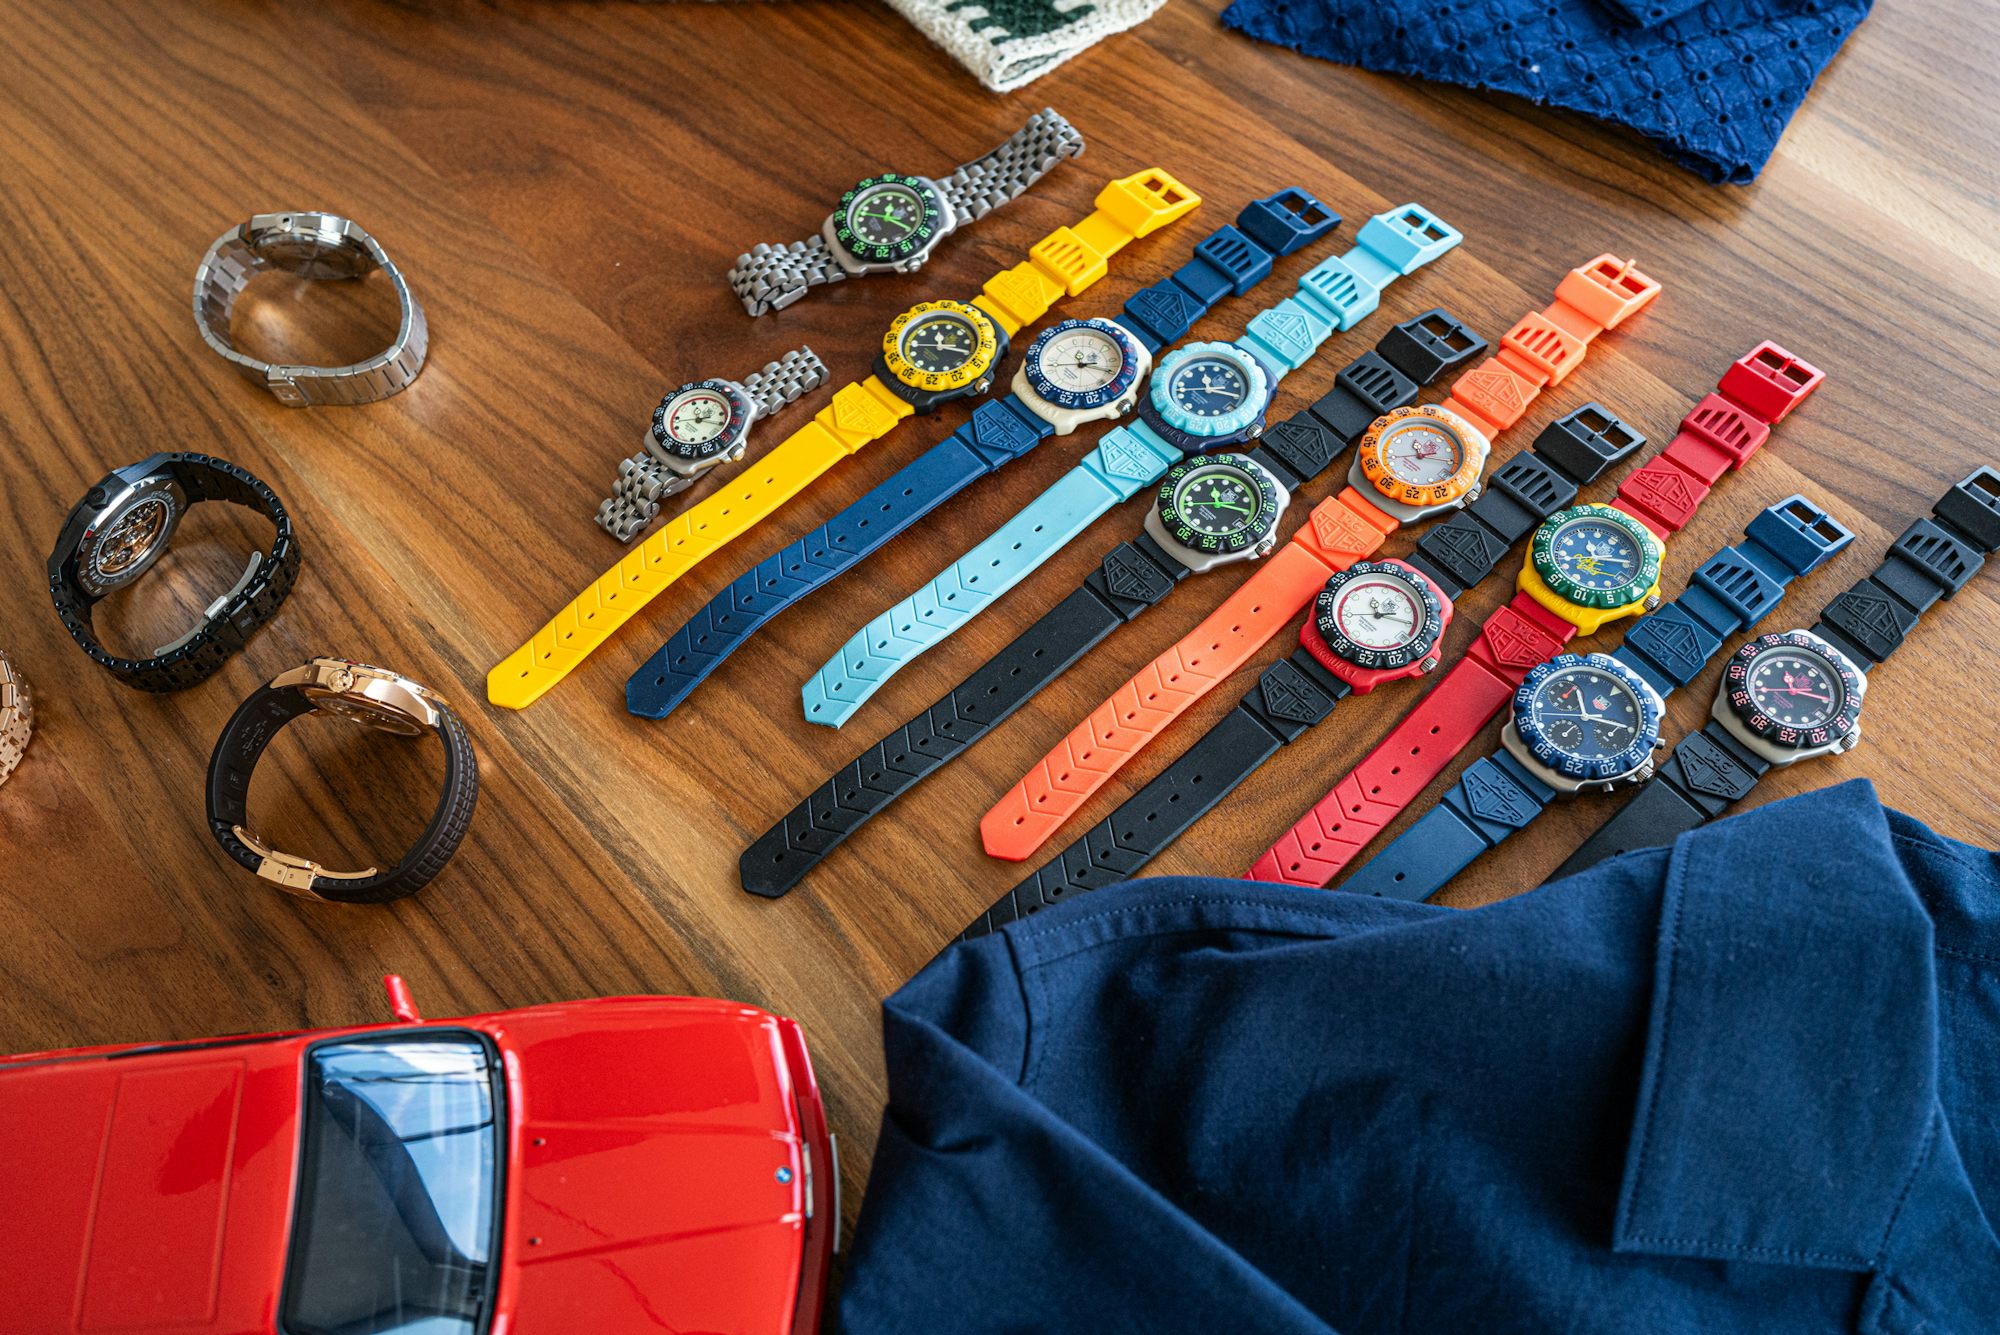 A collection of colorful watches in different styles and metals laid out on a wooden table next to some fabric and a model car